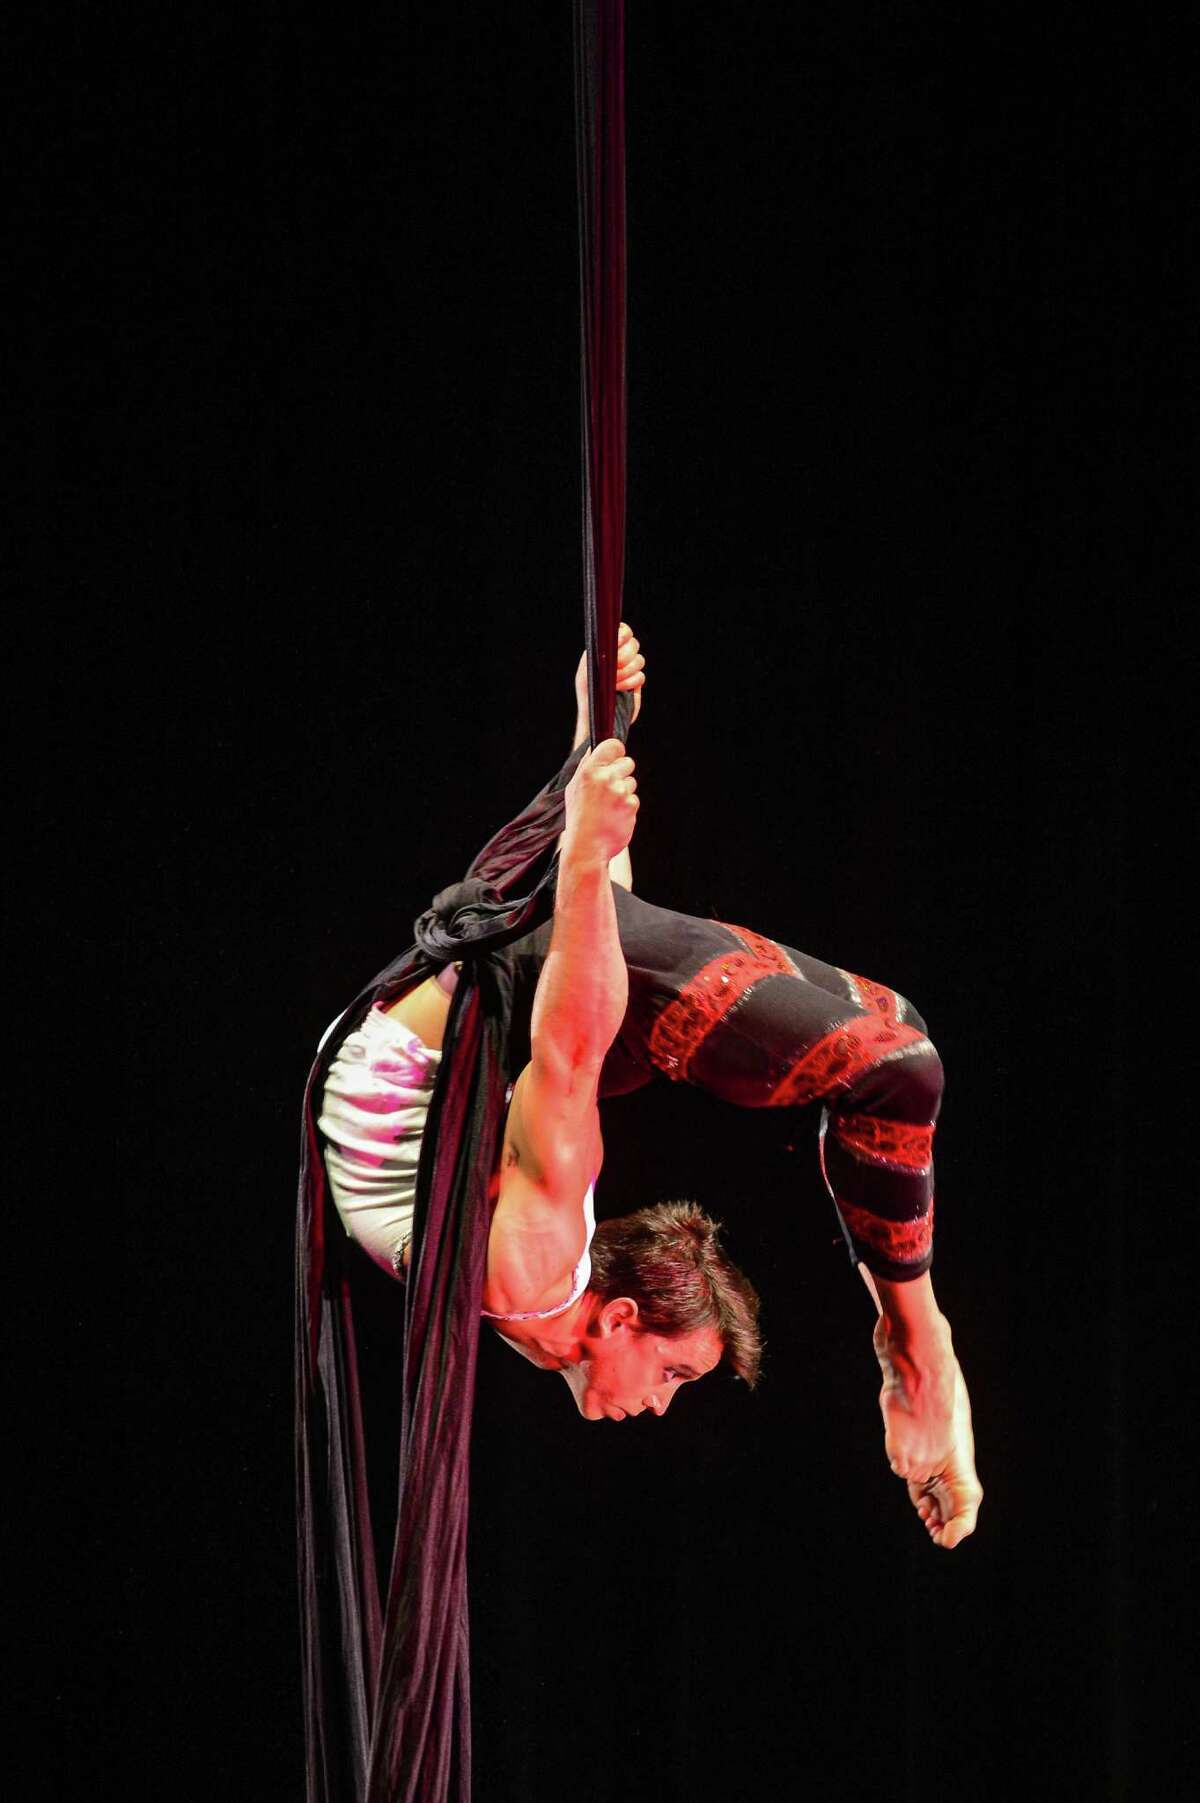 Aerialist Nicolas Maffey performs on the Silks at the 2015 U.S. Aerial Championship at Rose Nagelberg Theater on February 6, 2015 in New York City.